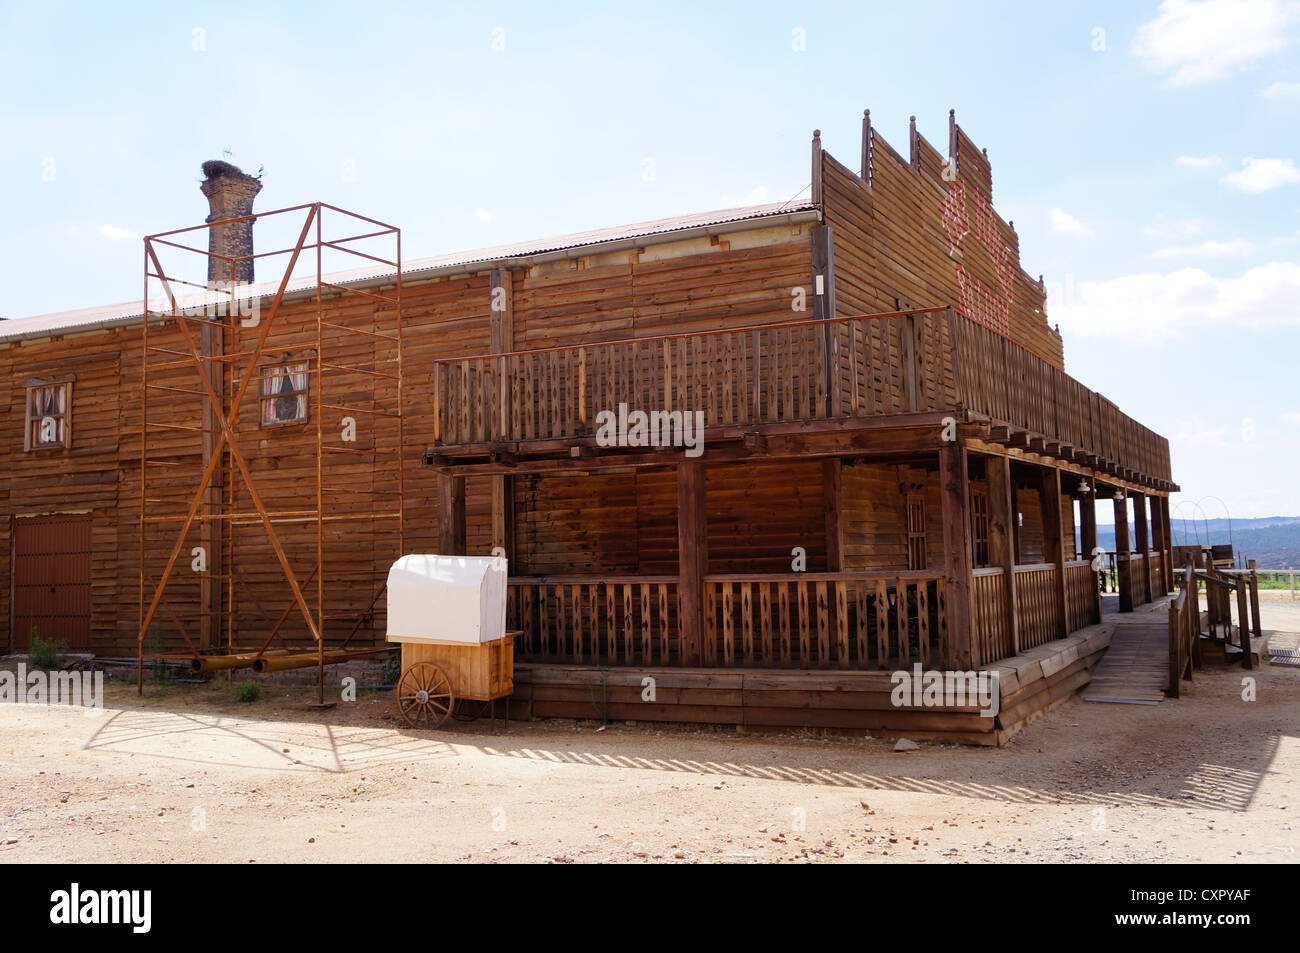 Western town saloon, a front view of an western wagon from the days of the wild west Seville, Spain Stock Photo